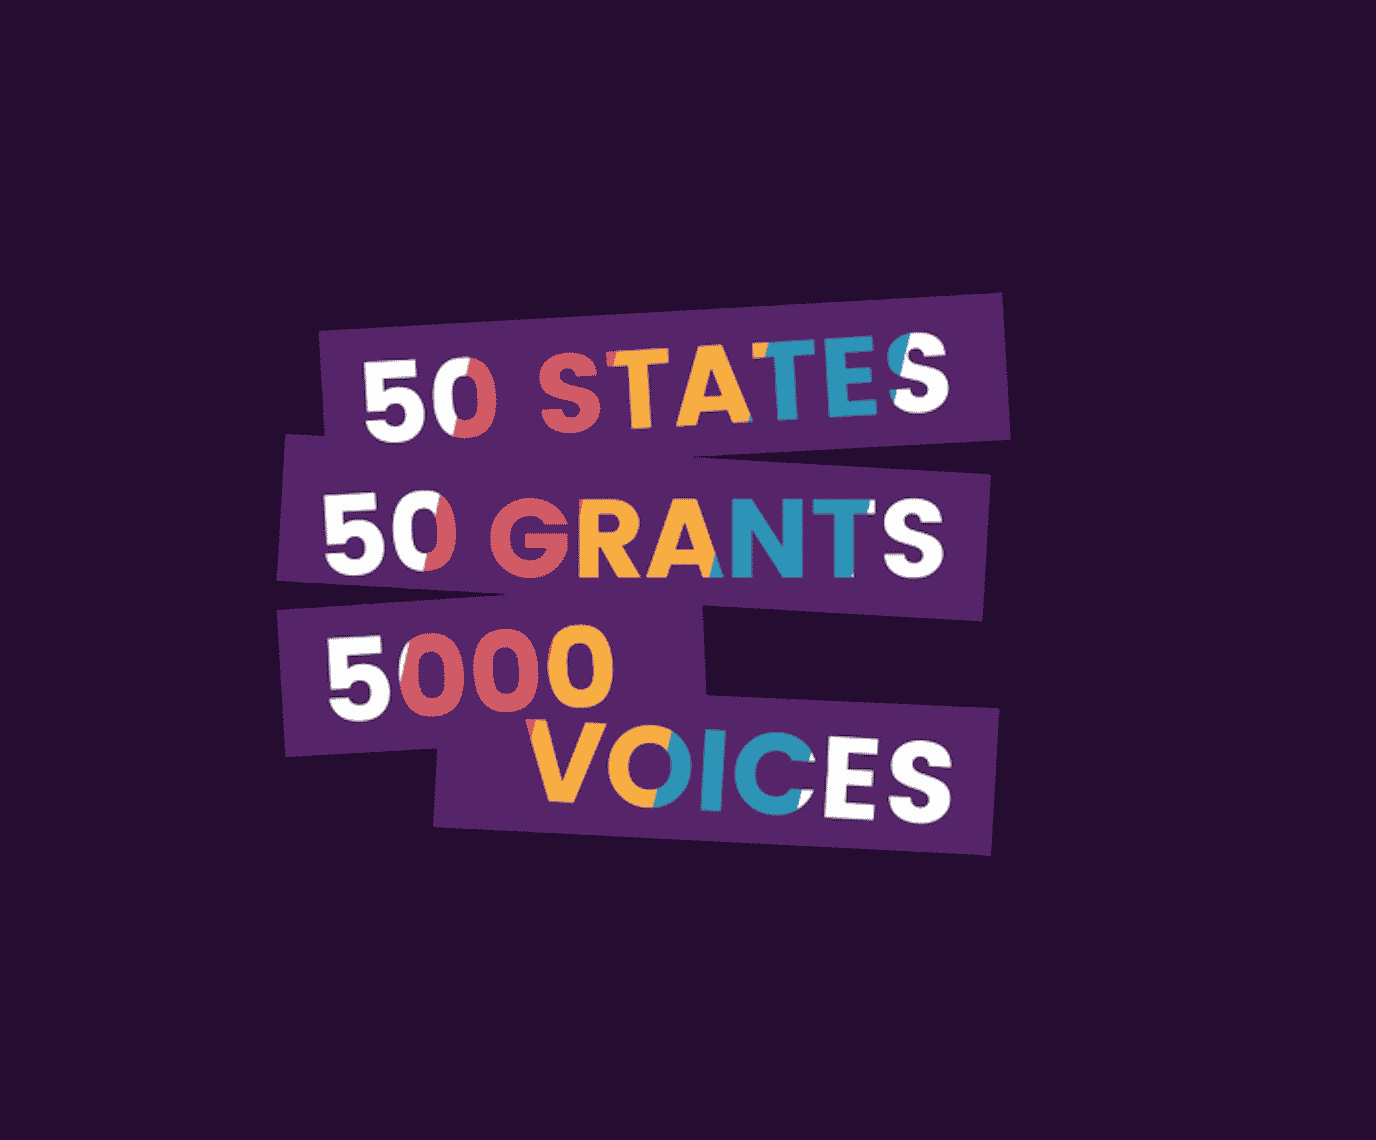 50 states. 50 grants. 50 voices campaign graphic.